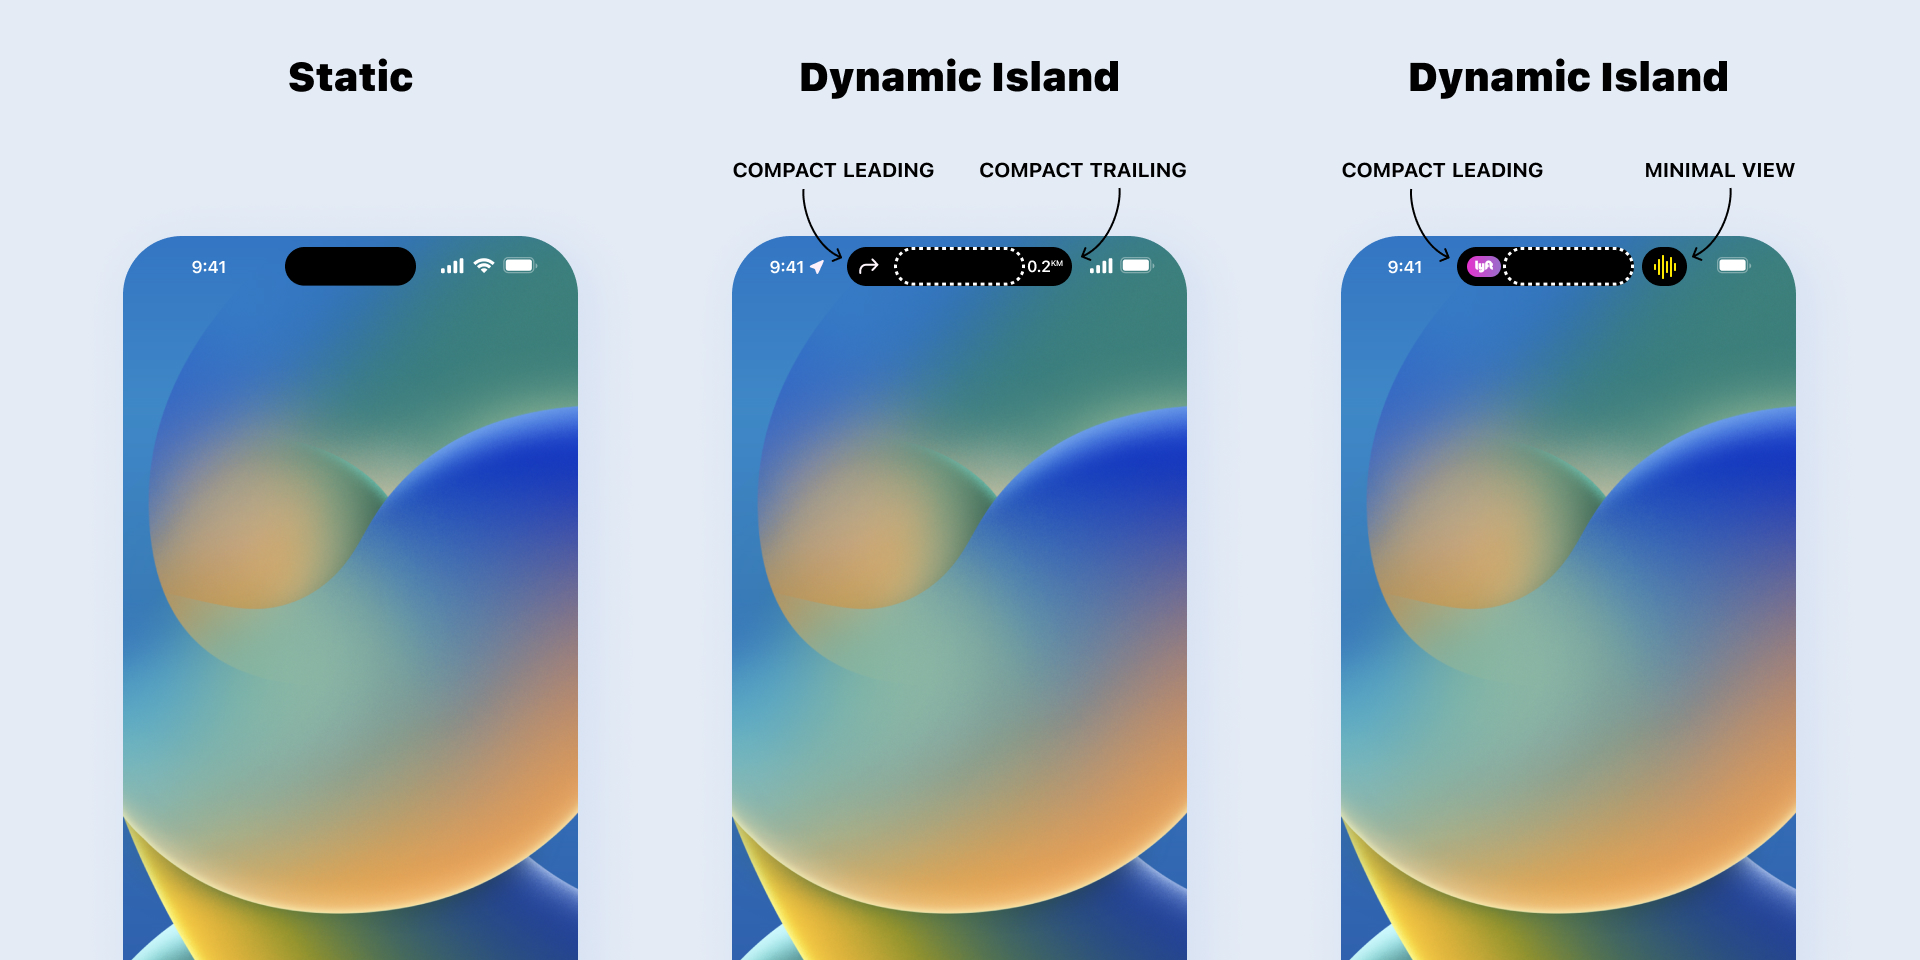 Dynamic island compact and minimal view